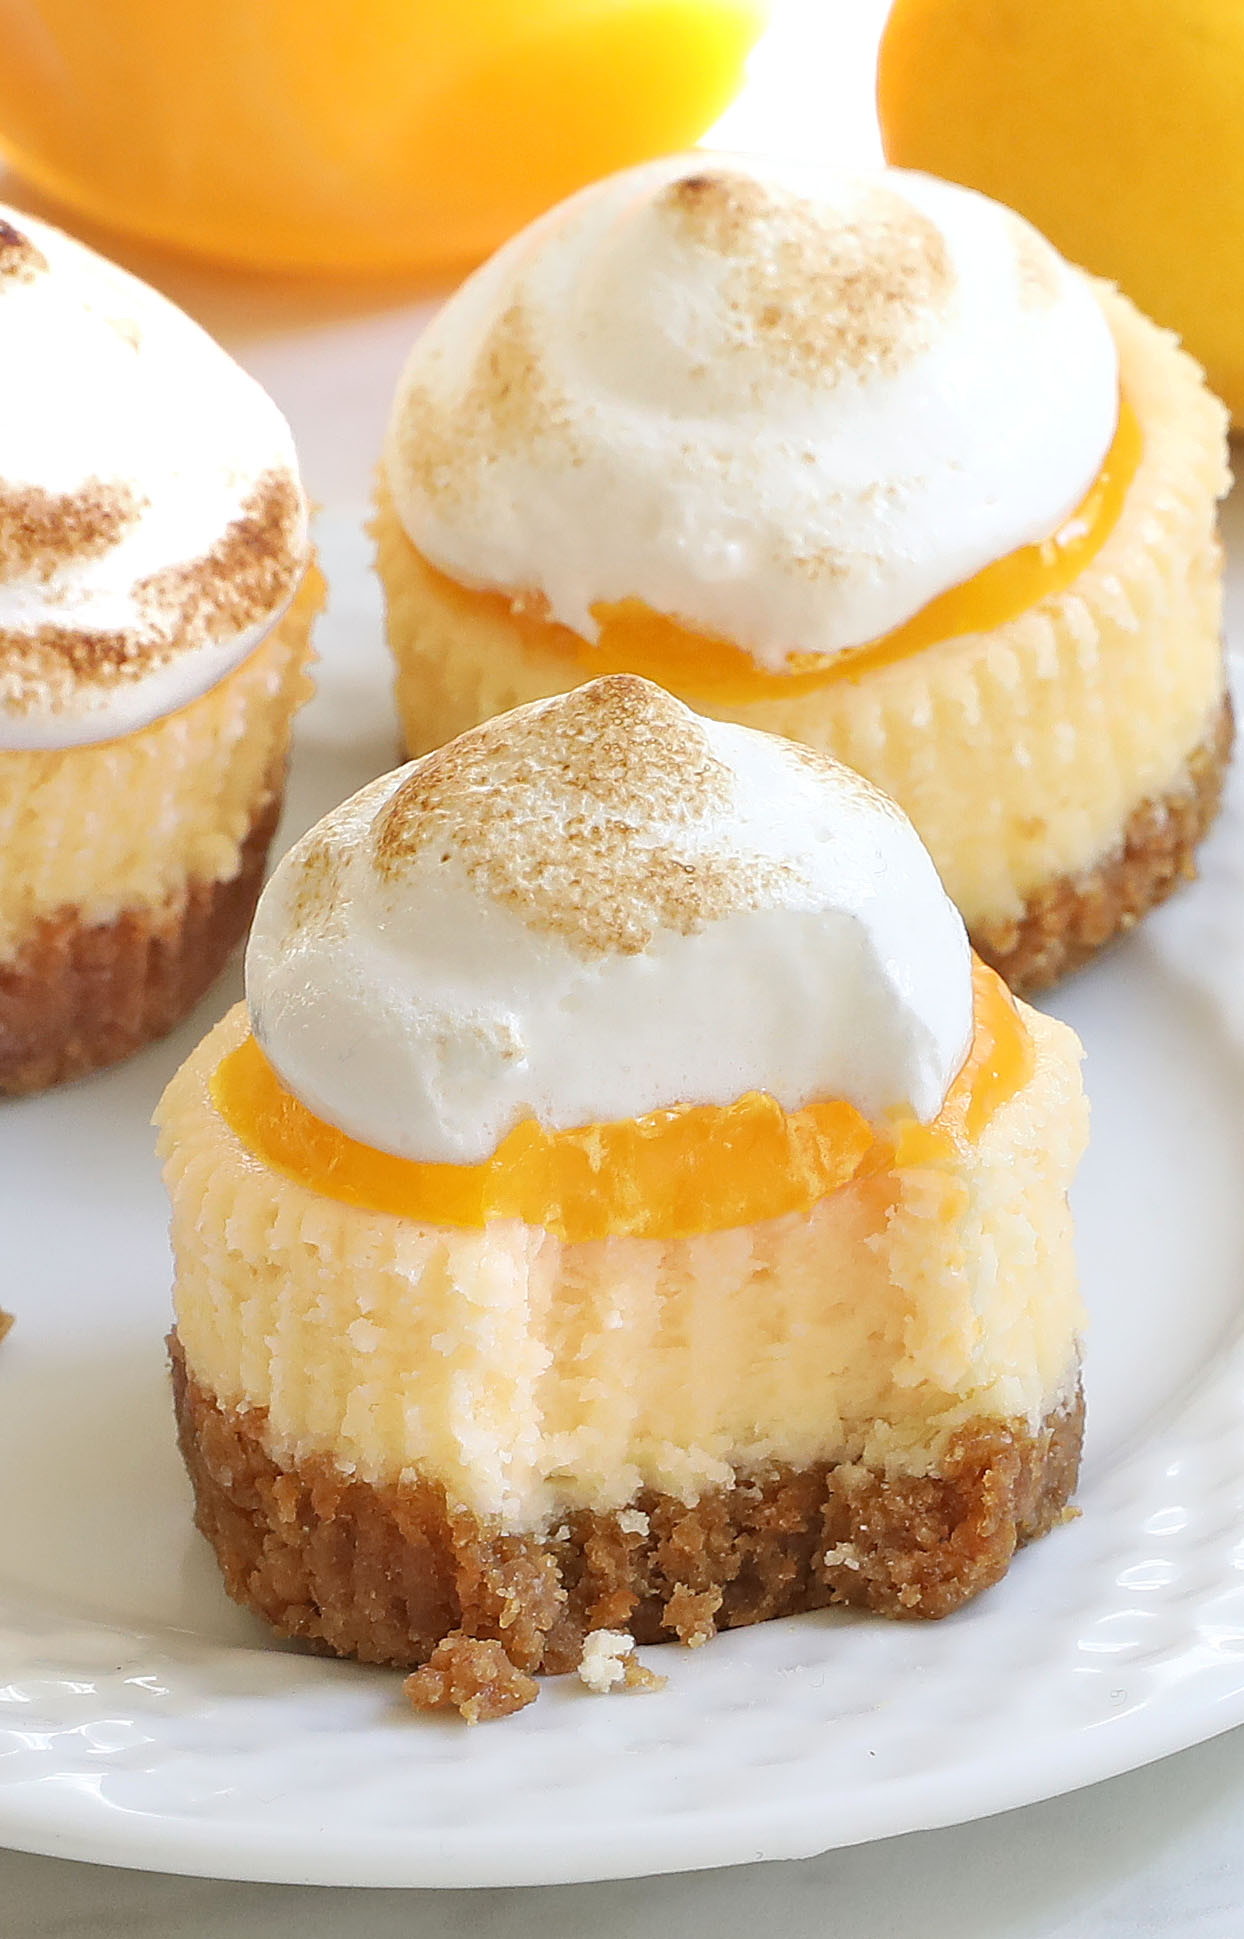 Lemon Meringue Mini Cheesecakes are light and lemony bite-sized desserts and will be the perfect addition to your Easter or Mother’s Day menu!